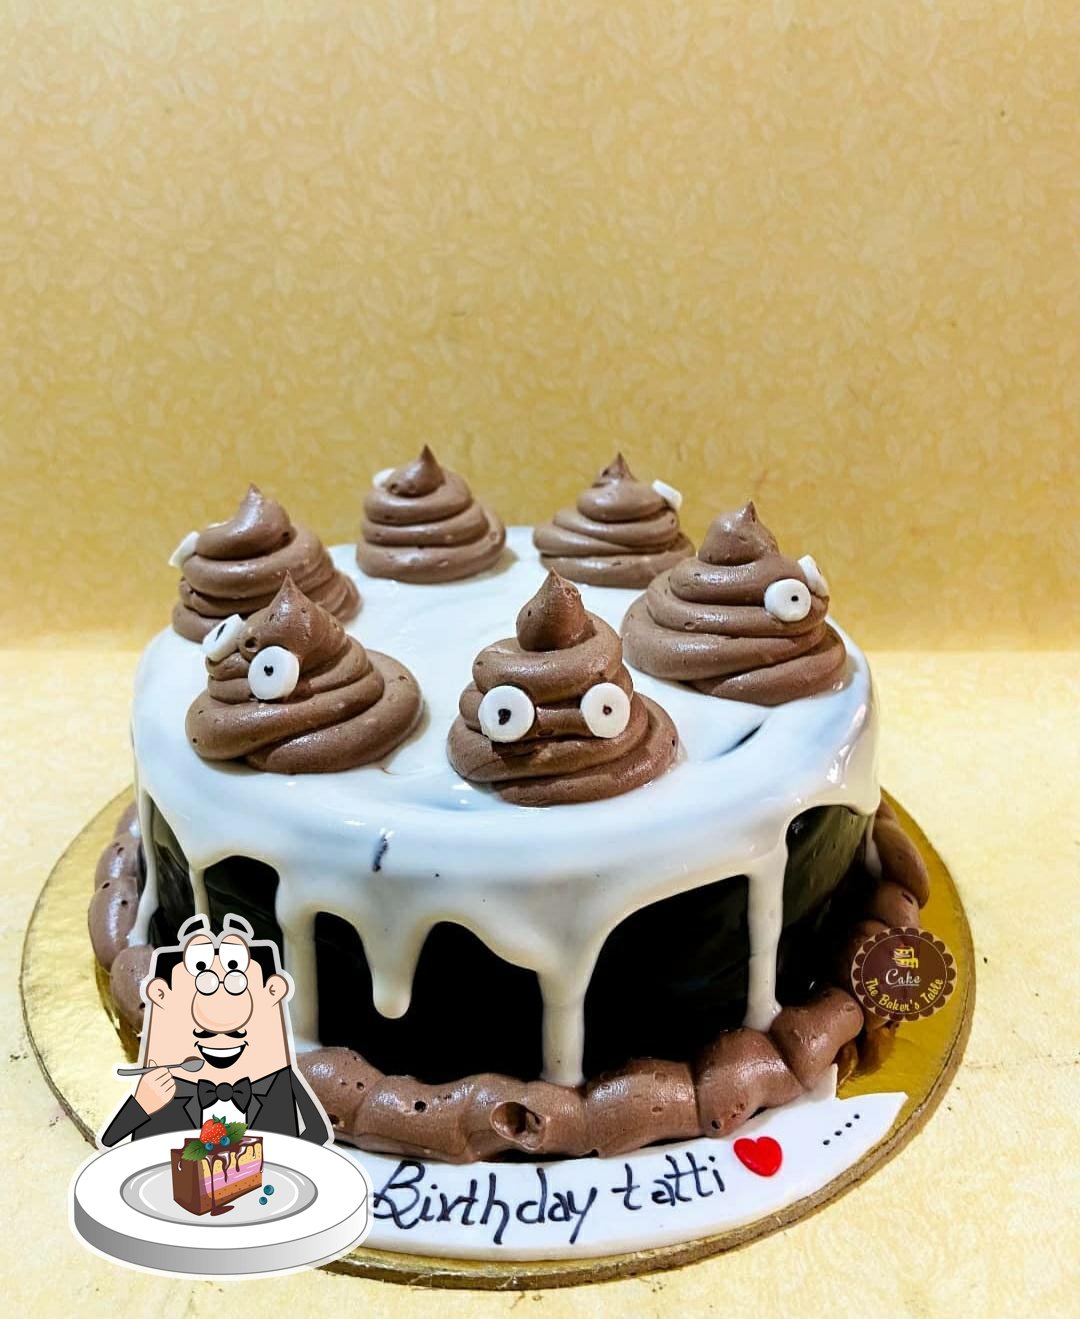 Poop Theme Cake 😇 - The Sweet Tooth By: Rena G. | Facebook